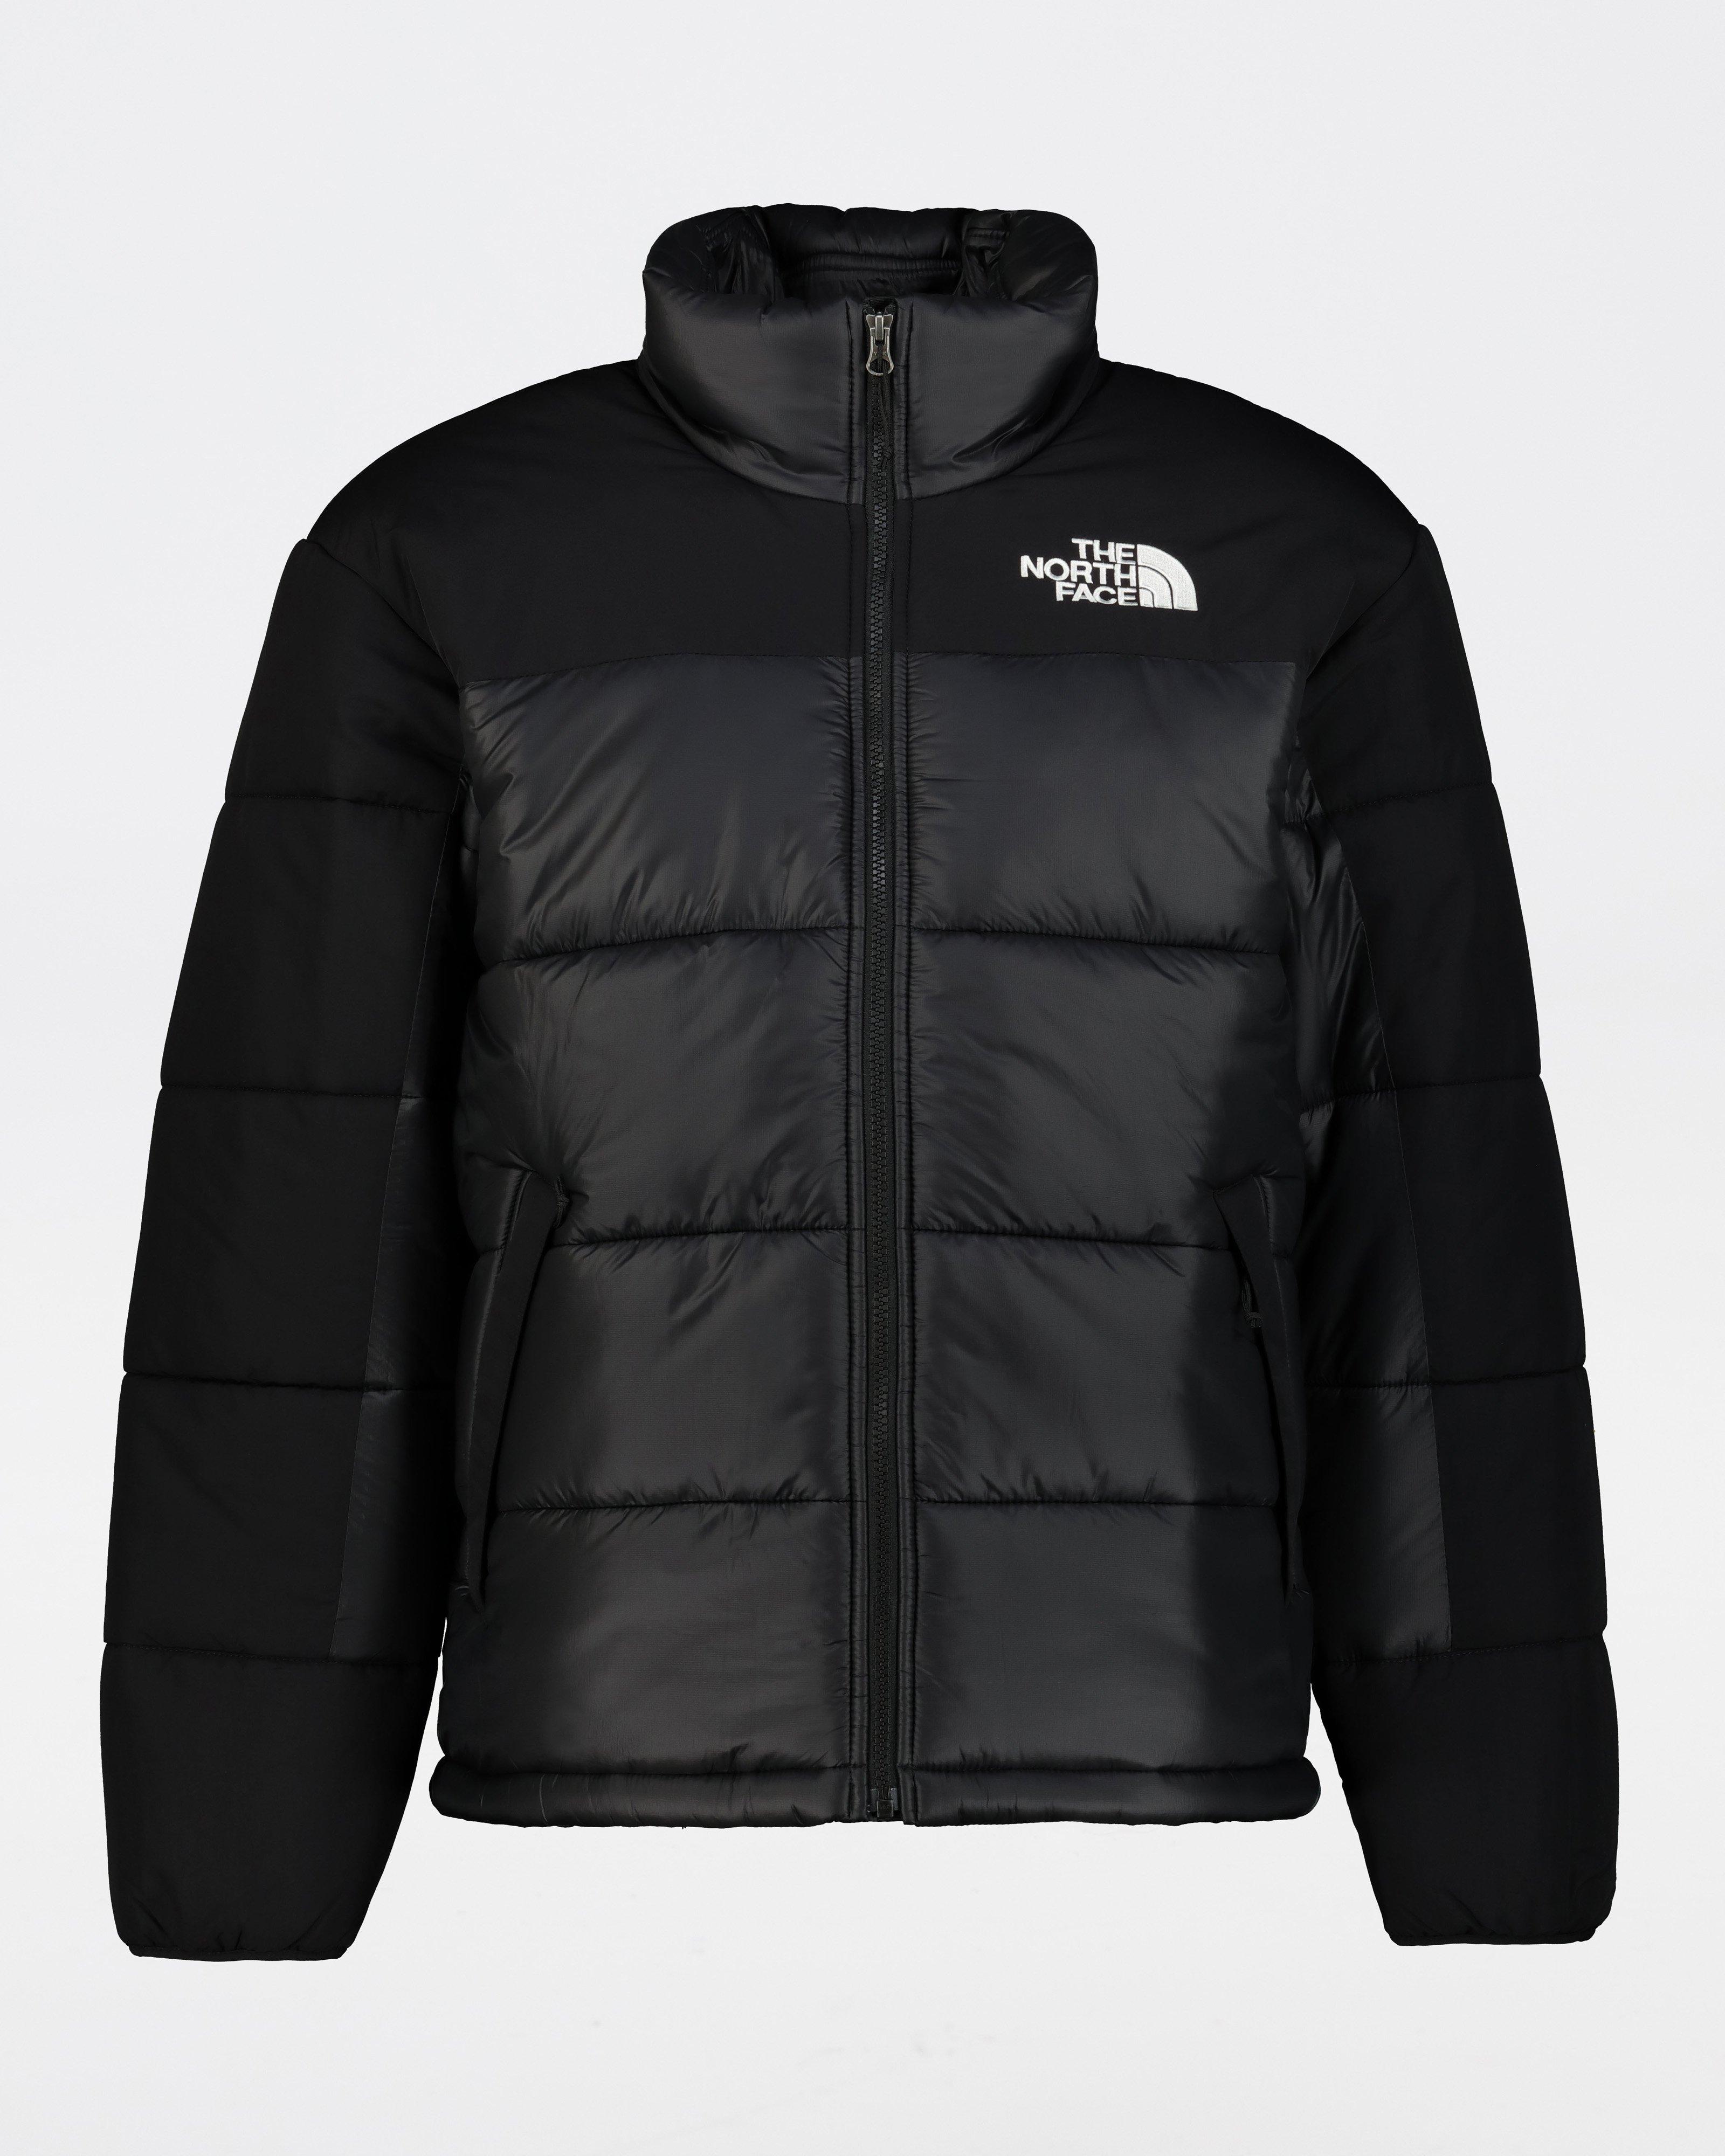 The North Face Men’s Himalayan Insulated Jacket | Cape Union Mart